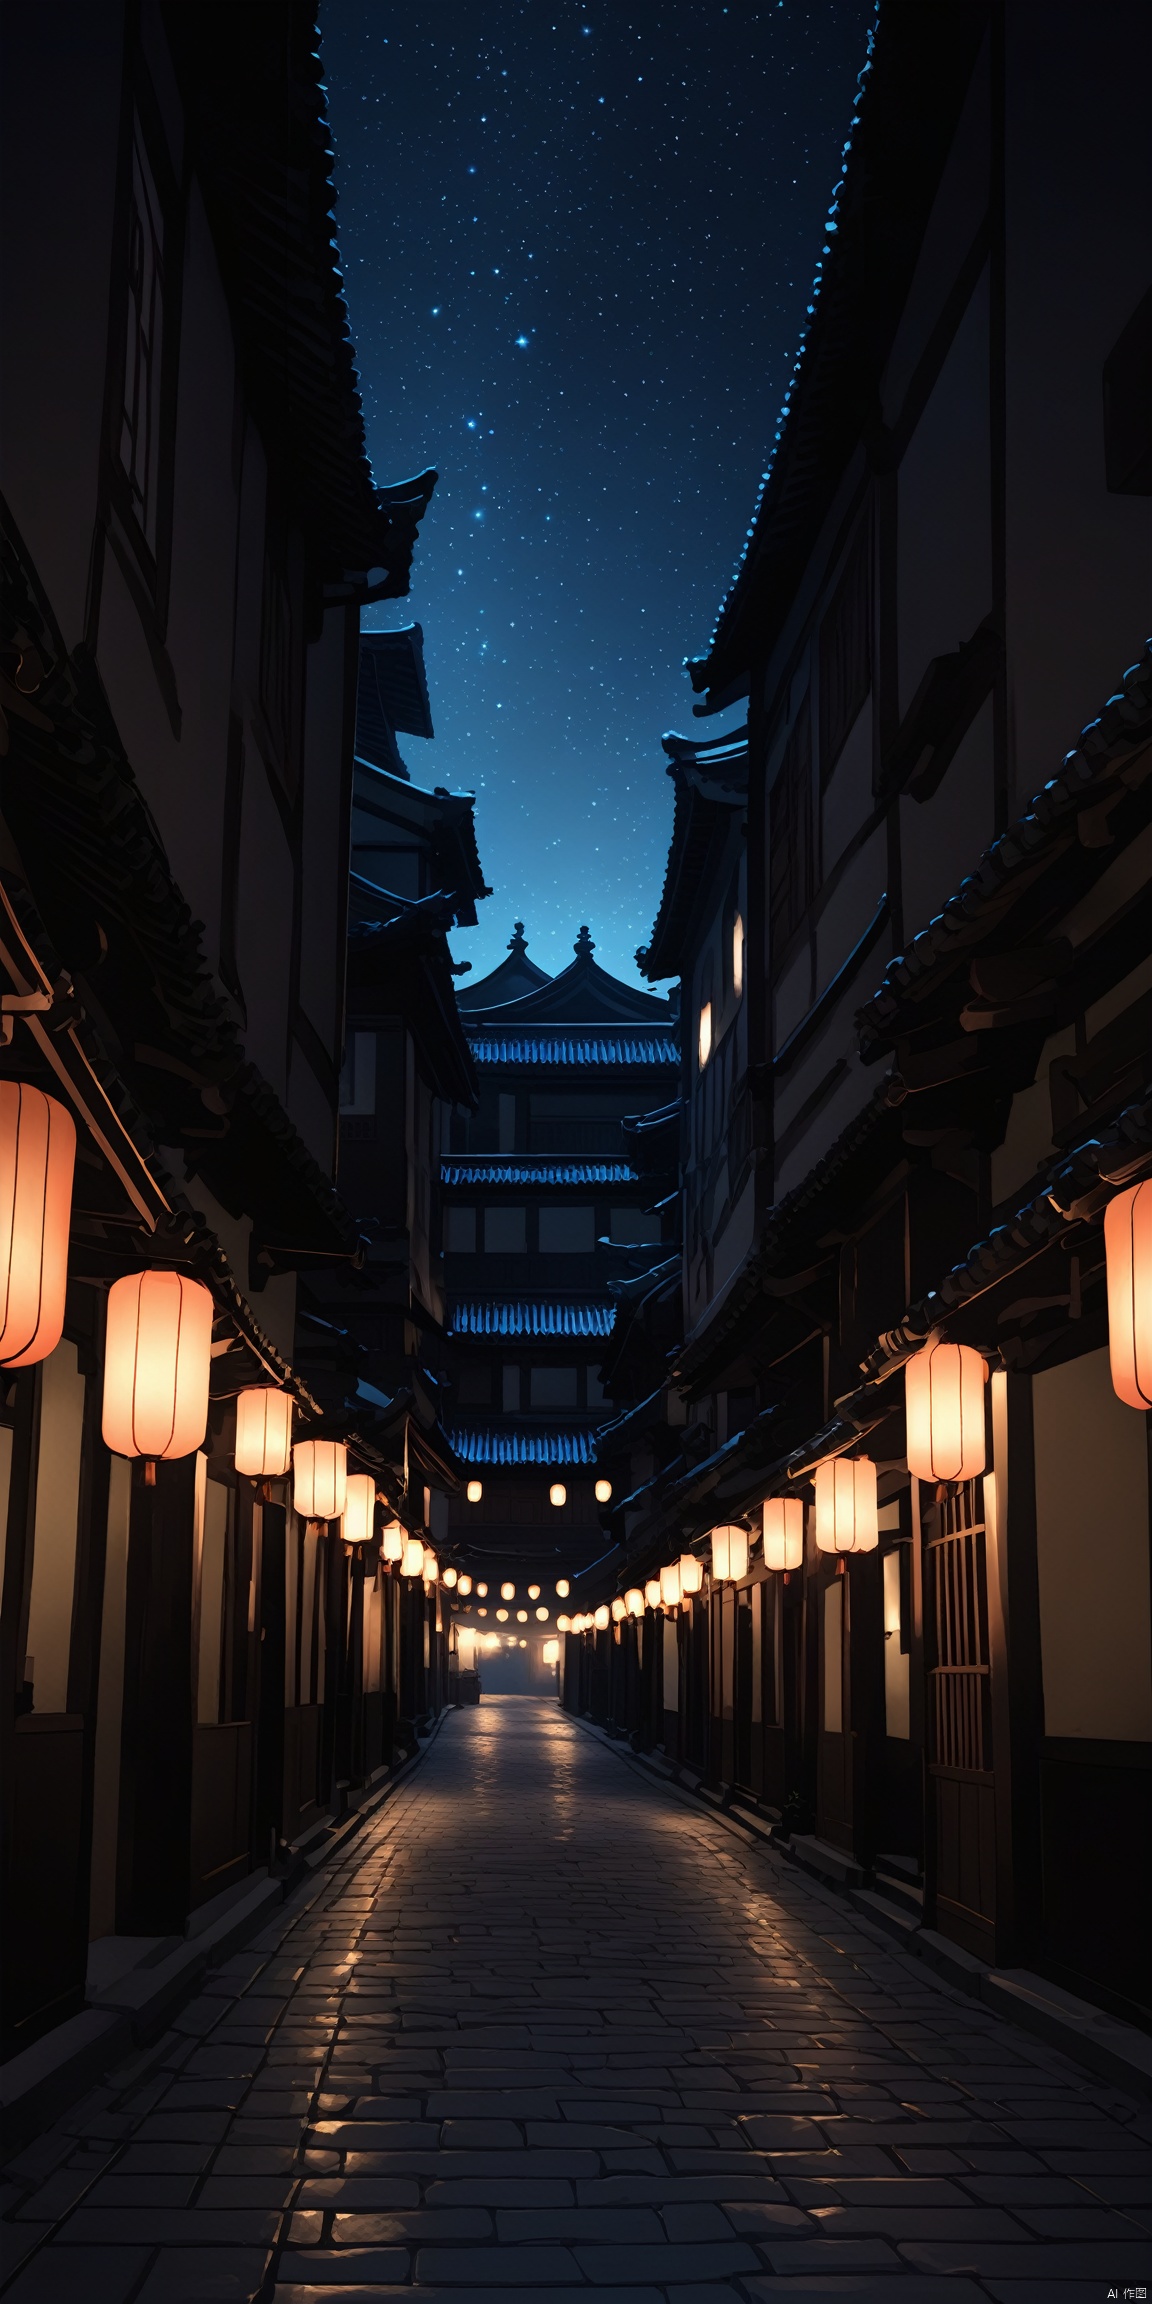 A pitch-black night with sparkling stars. The camera slowly zooms in, revealing an ancient courtyard with a few dim lanterns swaying, illuminating the silhouette of old buildings.